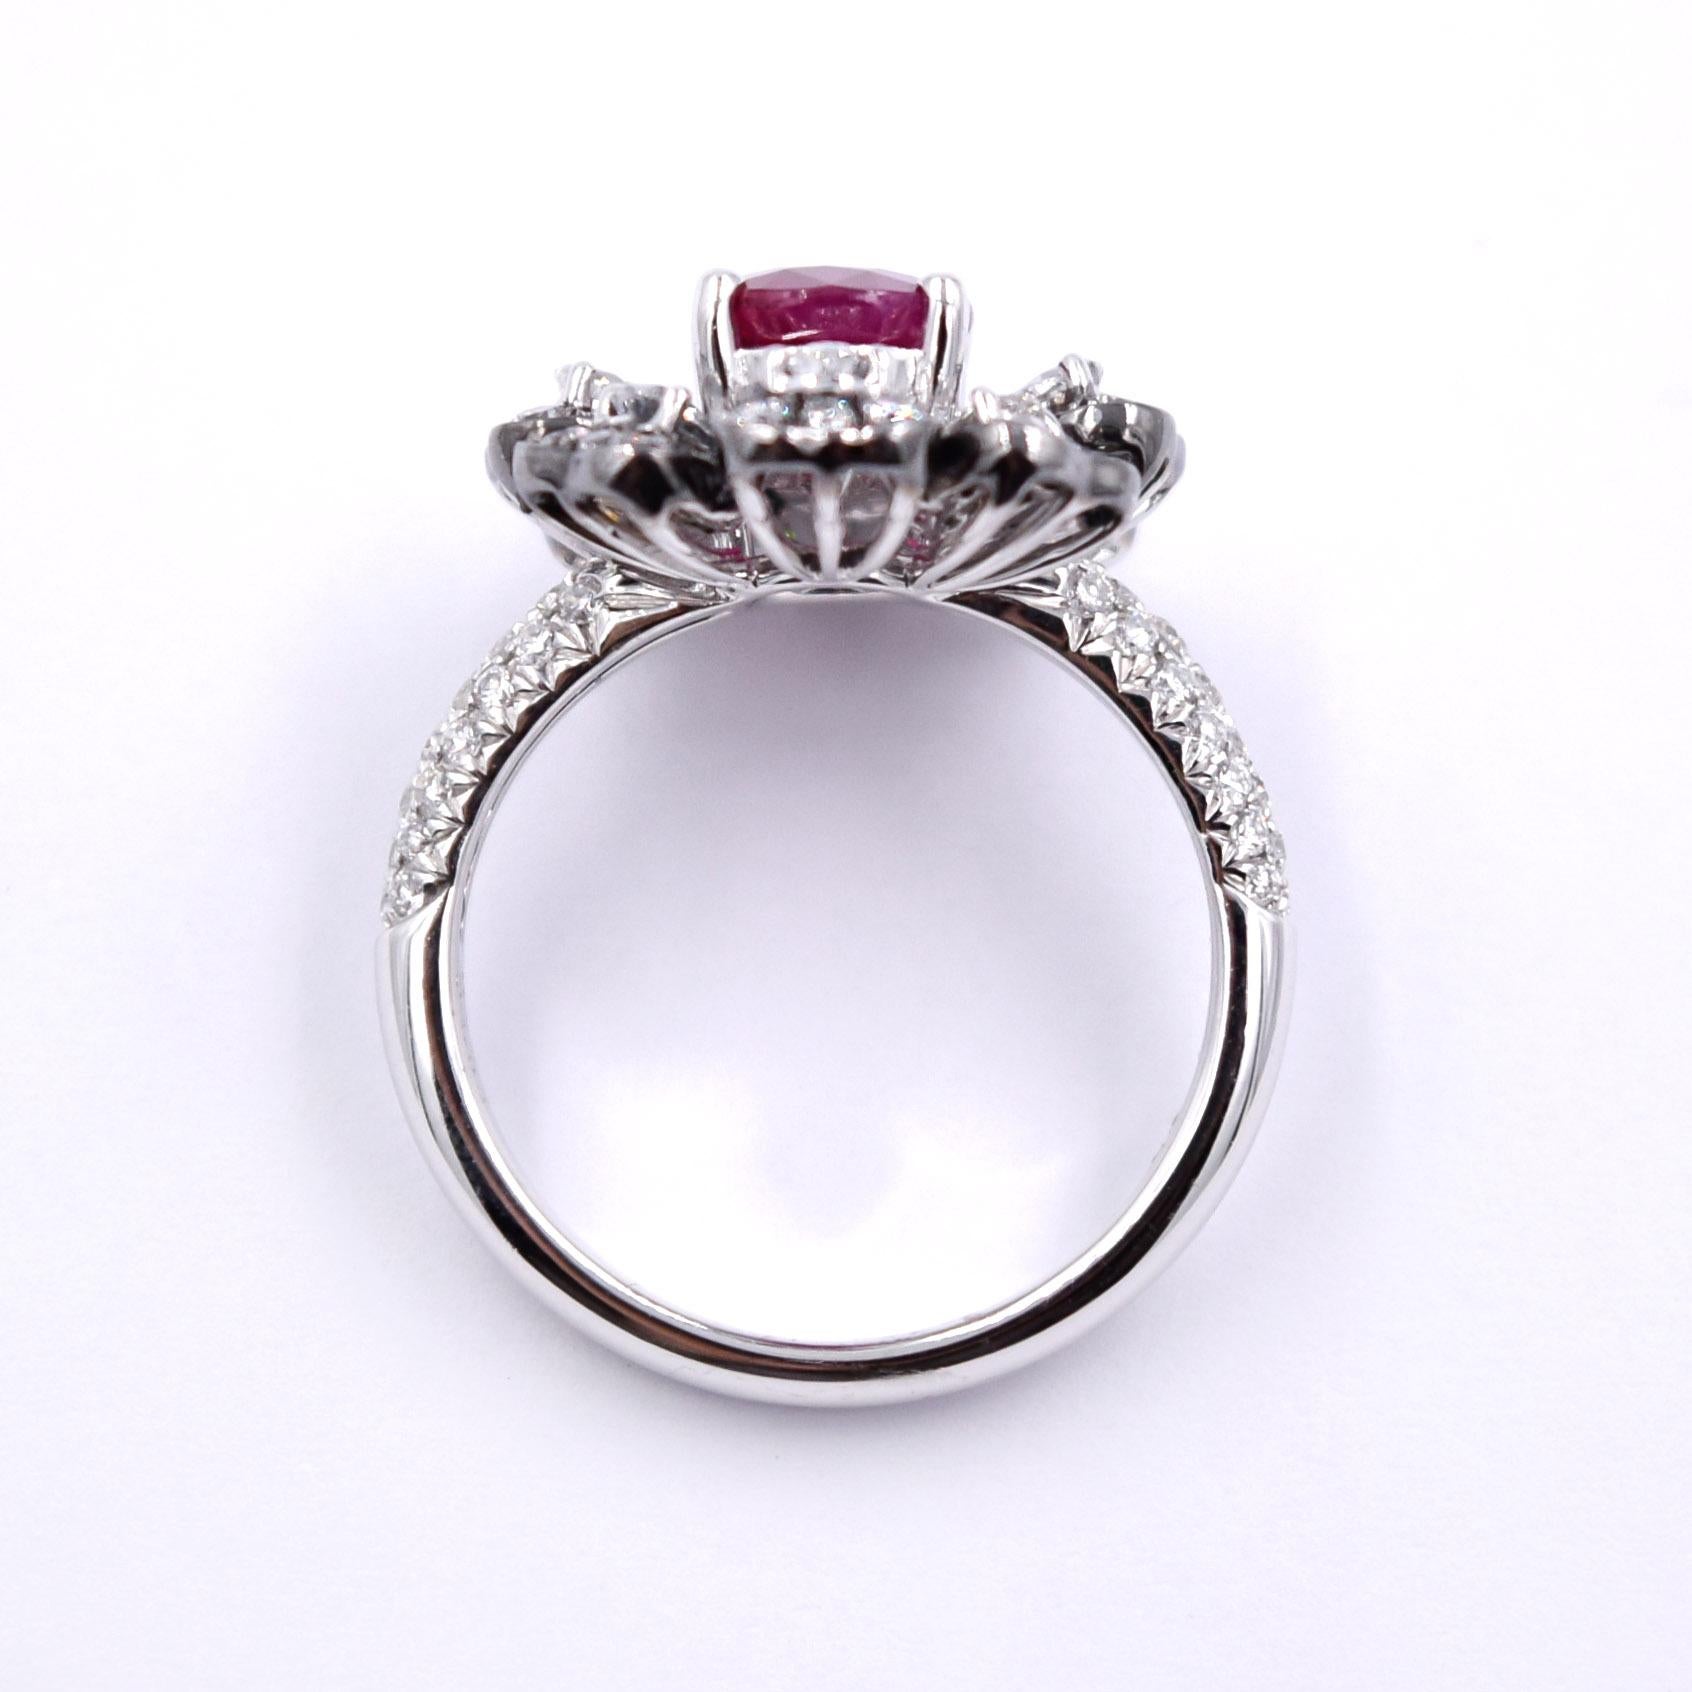 2.03 Carat Ruby and 1.08 Carat White Diamond Cocktail Ring in 18K Palladium Gold For Sale 2